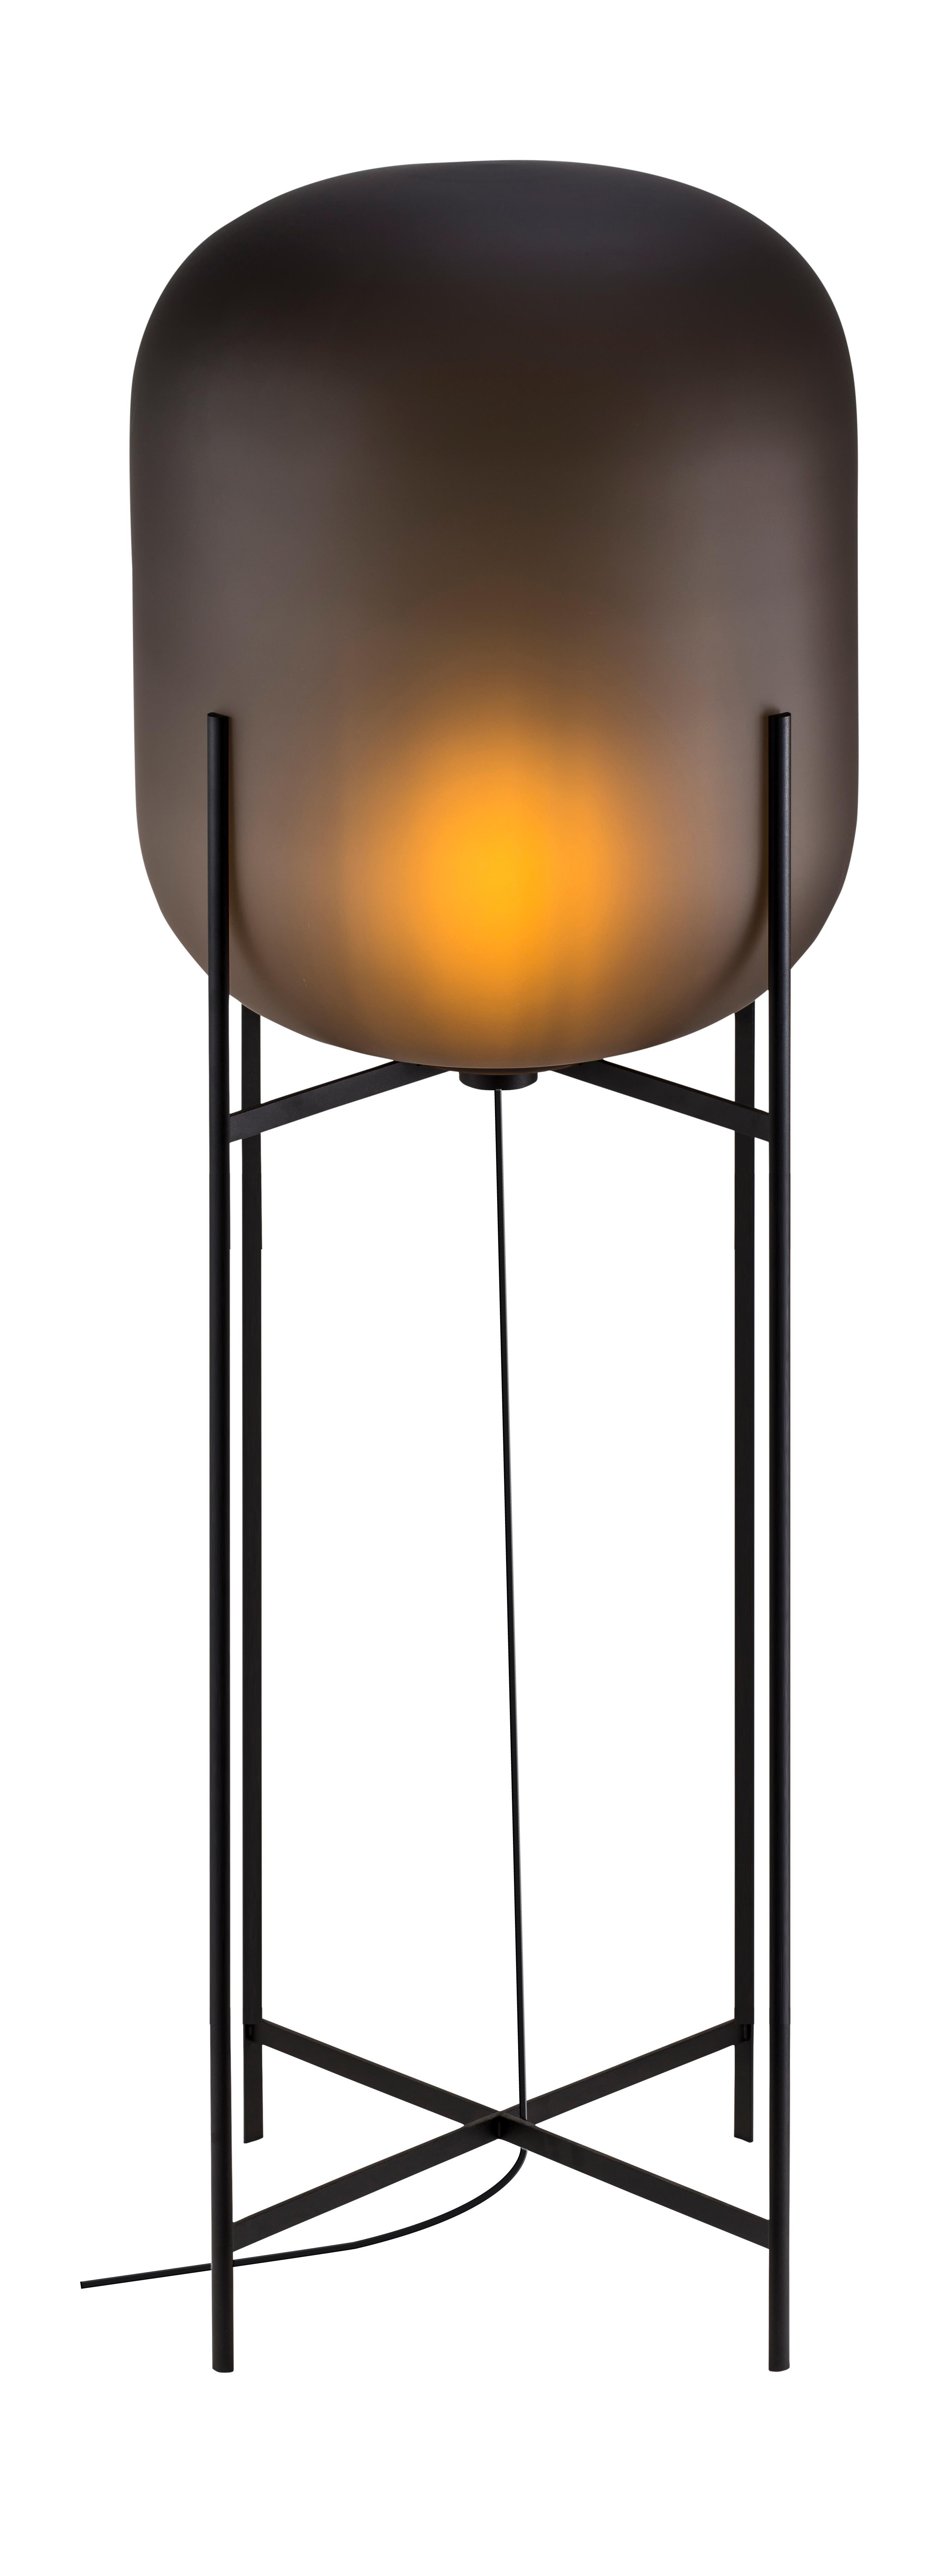 Oda big smoky grey acetato black floor lamp by Pulpo
Dimensions: D45 x H140 cm
Materials: handblown glass coloured and steel.

Also available in different finishes. 

A slender base hugs a bulbous form. An industrial motif softened by the gentle